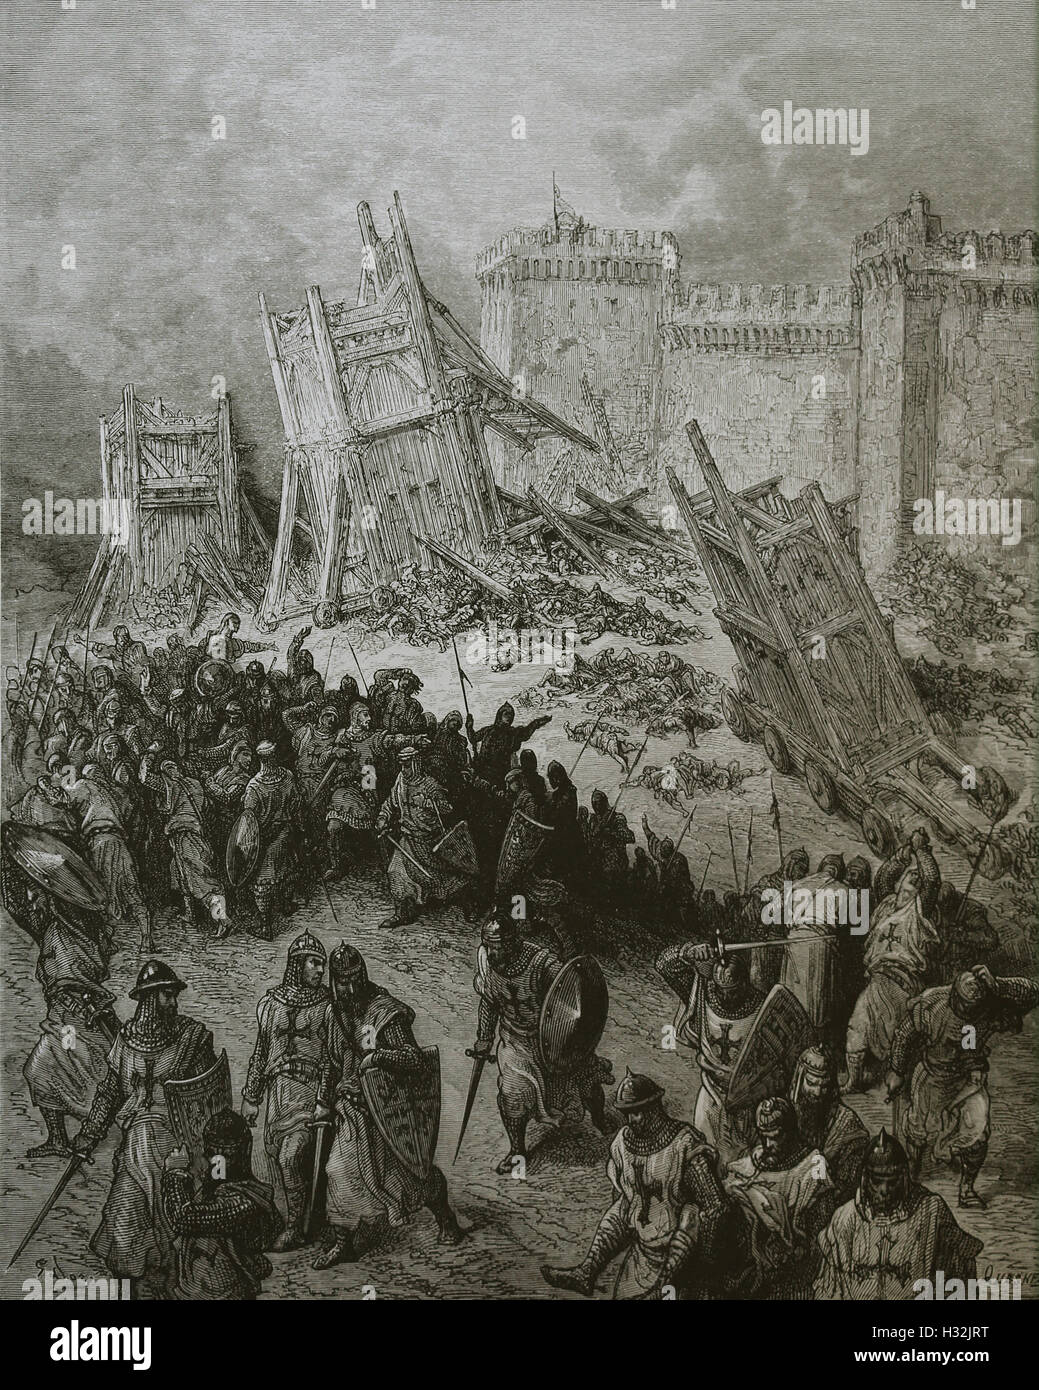 First Crusade (1096-1099). Crusaders repulsed in the second assault of Jerusalem. Engraving by Gustave Dore, 19th century. Stock Photo